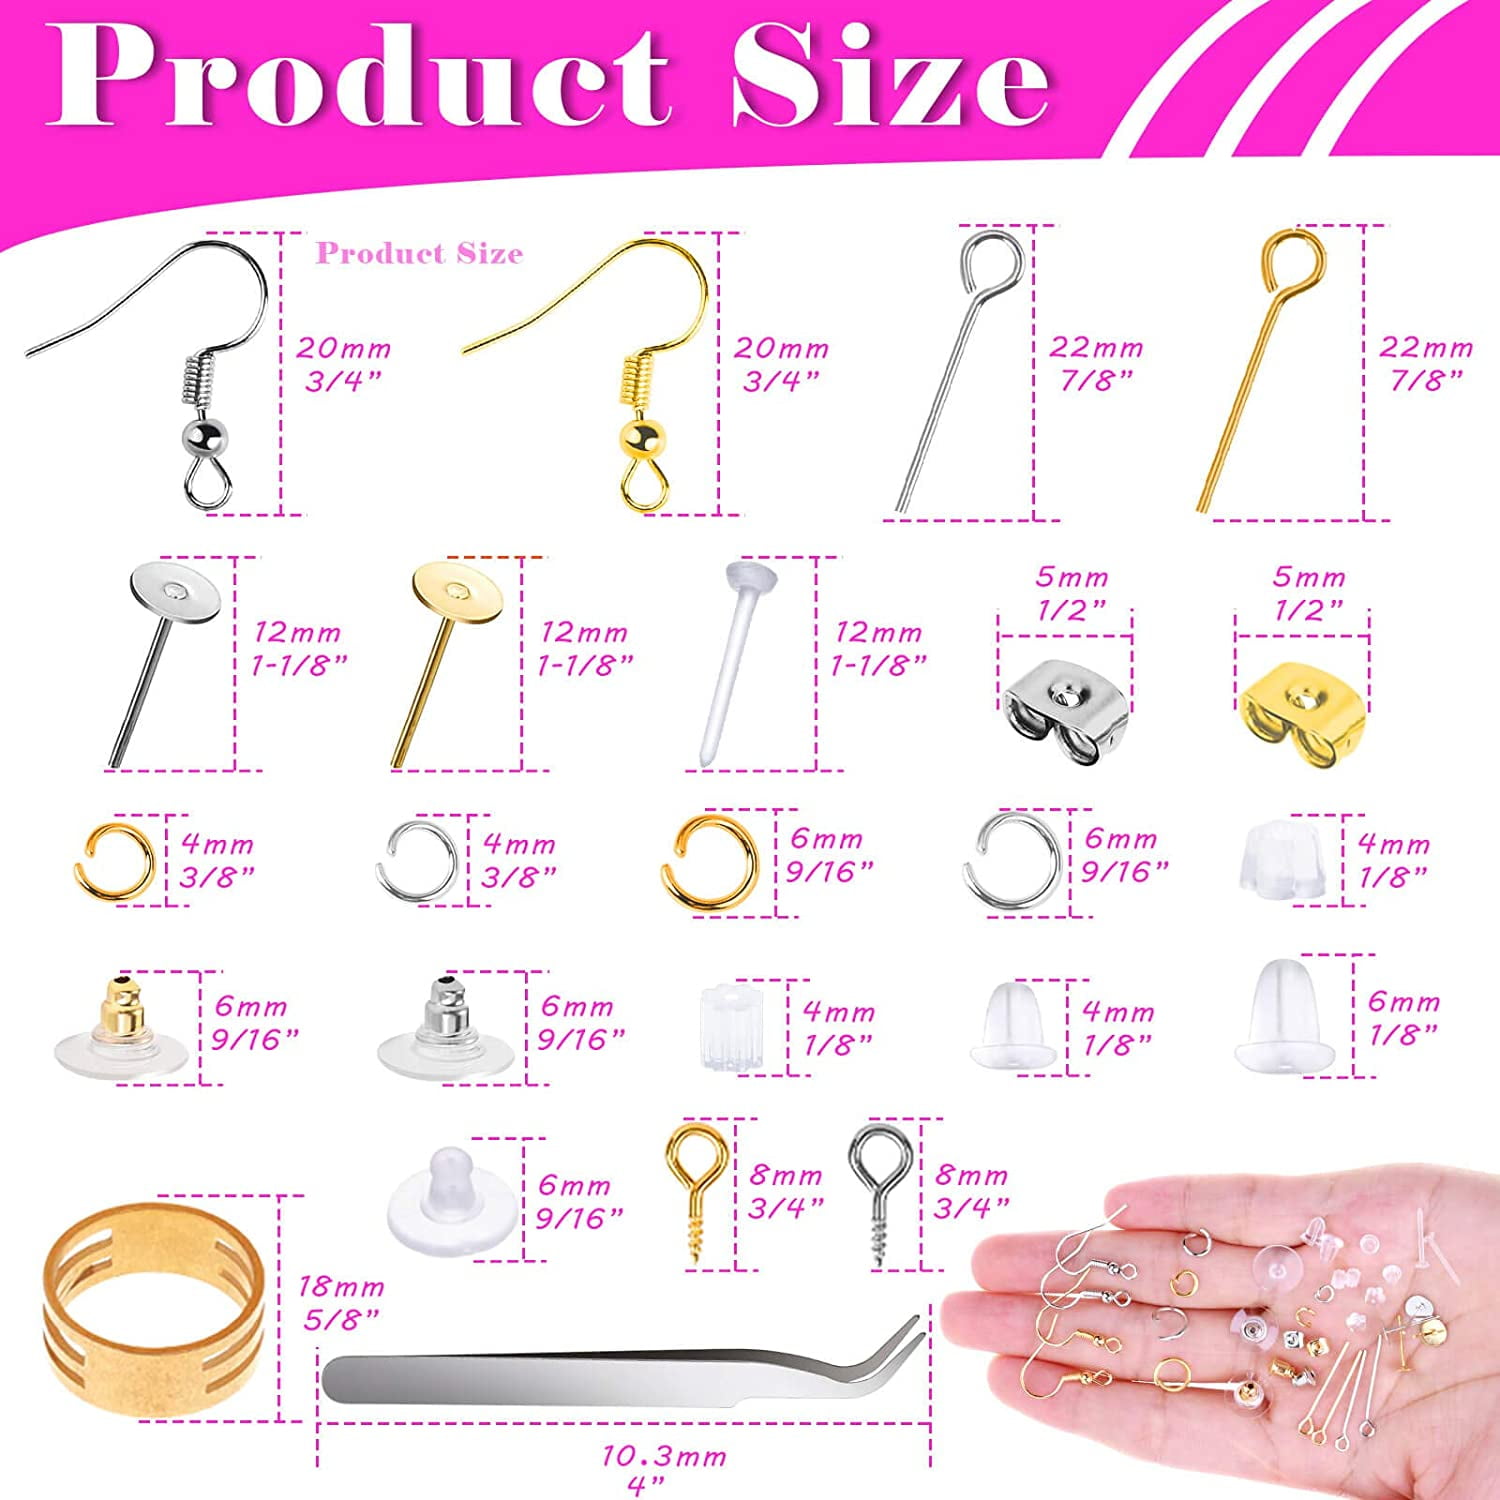 Earring Making Kit, 2450Pcs Earring Making Supplies Kit with Earring Hooks,  Earring Posts and Backs, Jump Rings for Jewelry Making 